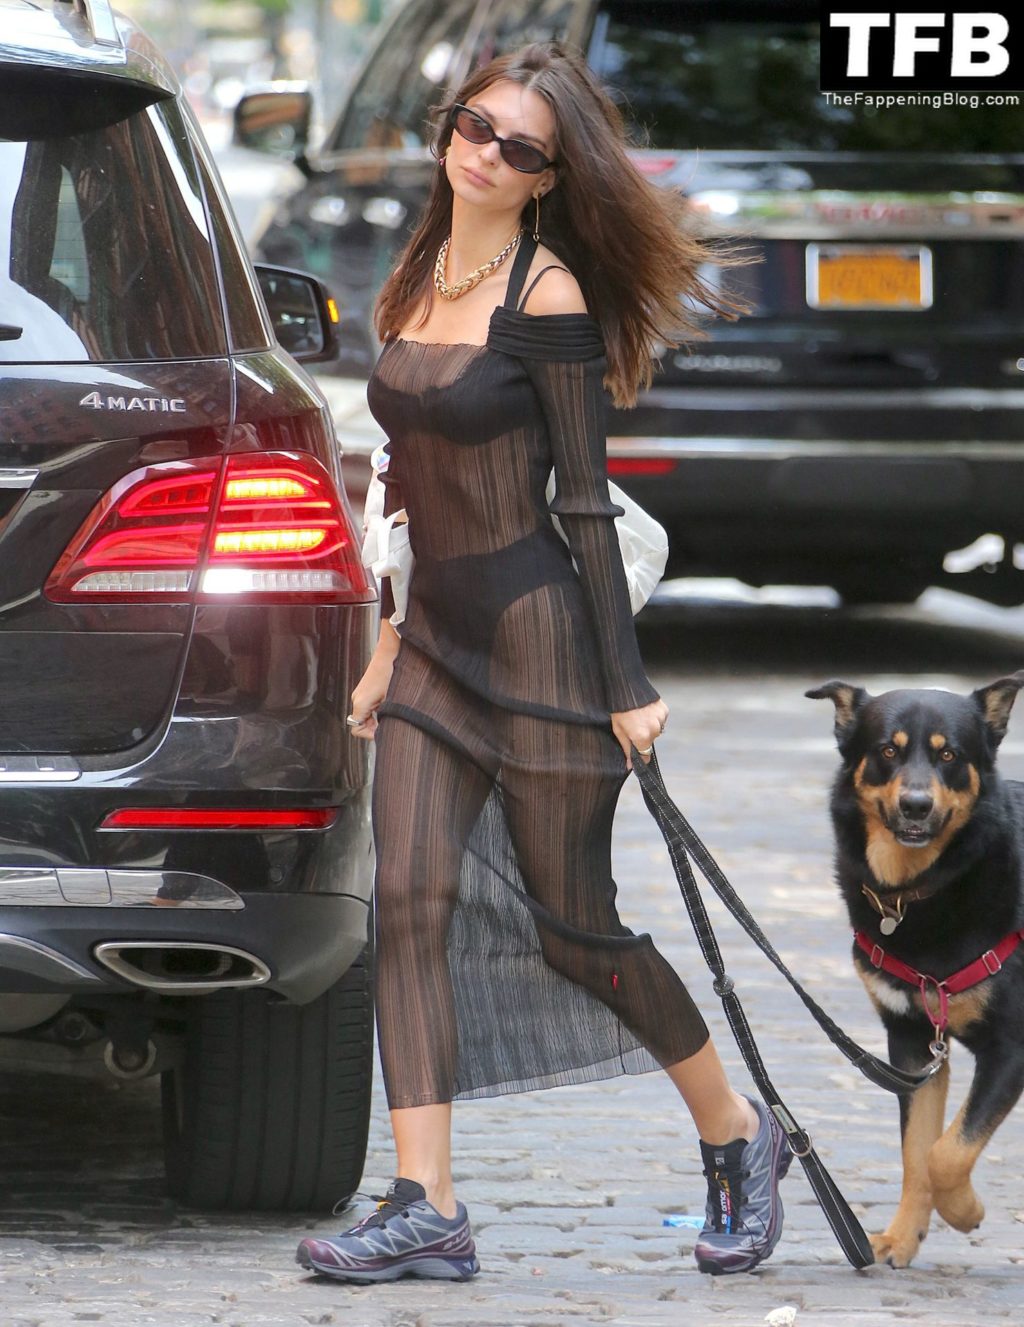 Emily Ratajkowski Sexy The Fappening Blog 21 1 1024x1327 - Emily Ratajkowski Bares It All in a See-Through Dress While Out Walking Her Dog in New York (33 Photos)